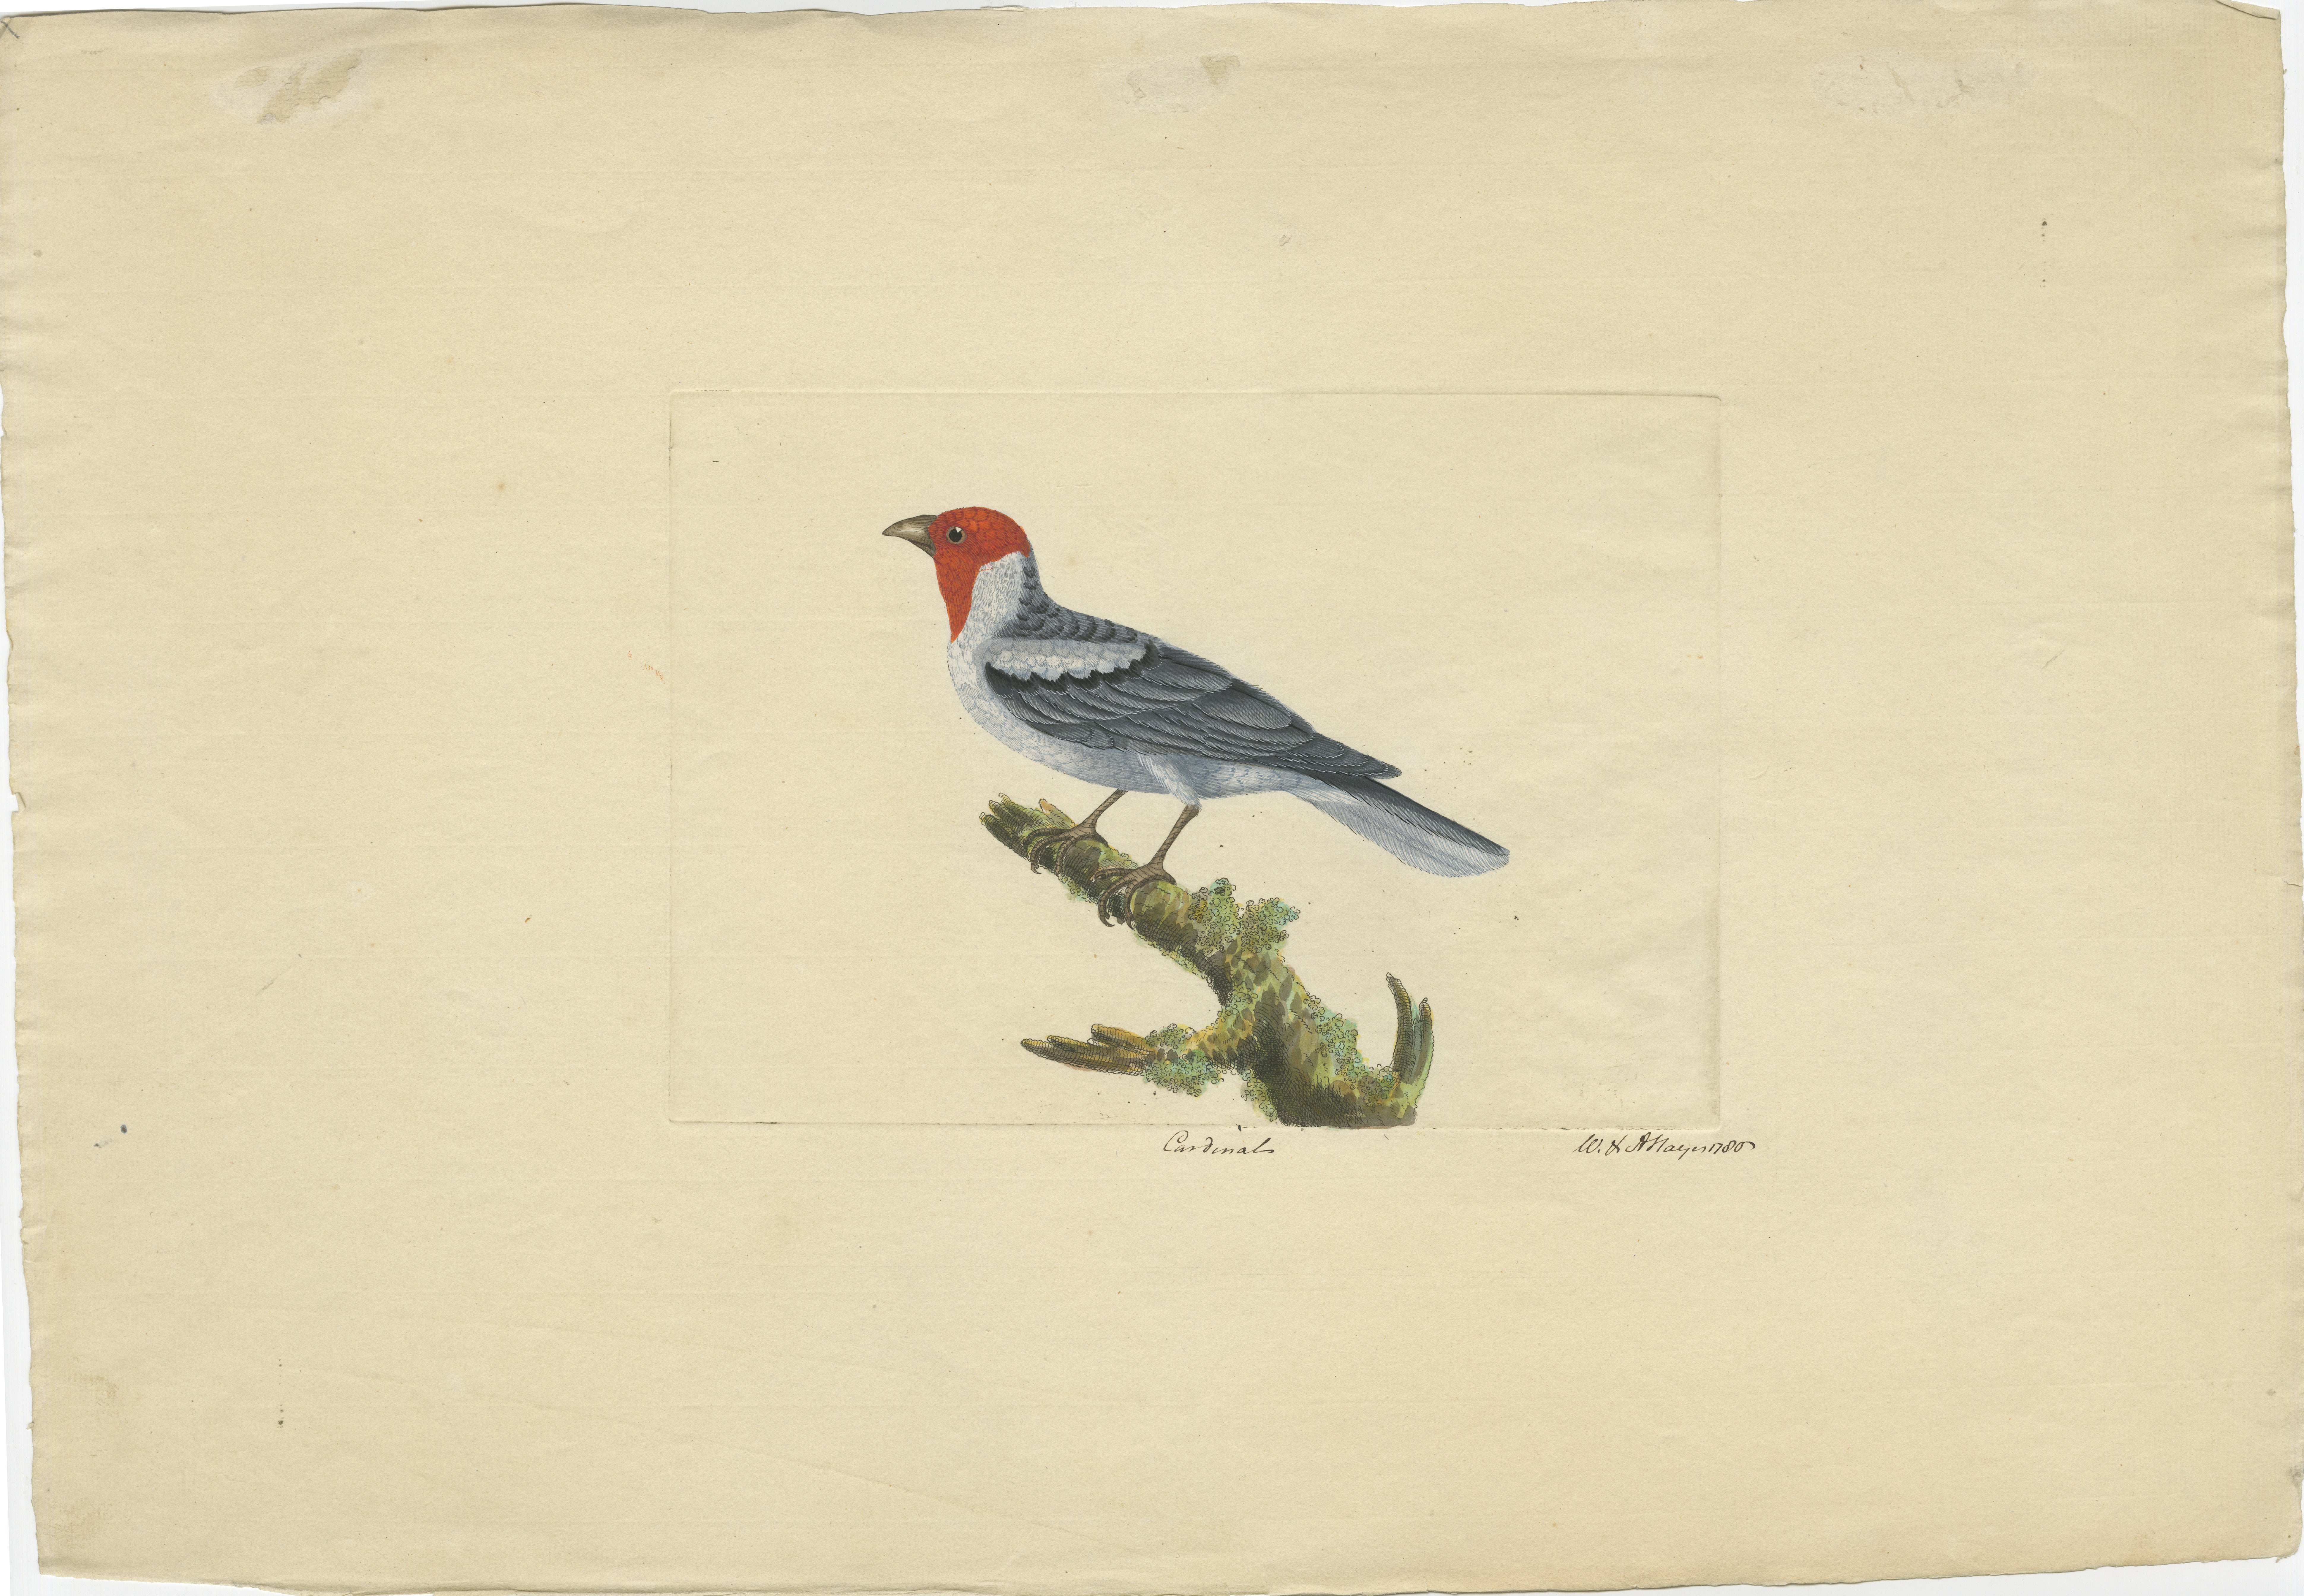 An original and finely hand-colored print of a Cardinal bird, signed by William Hayes with a reference to the year 1780 (or 1786). 

This particular print is titled 'Cardinals', which suggests the bird depicted is a cardinal, known for its vivid red